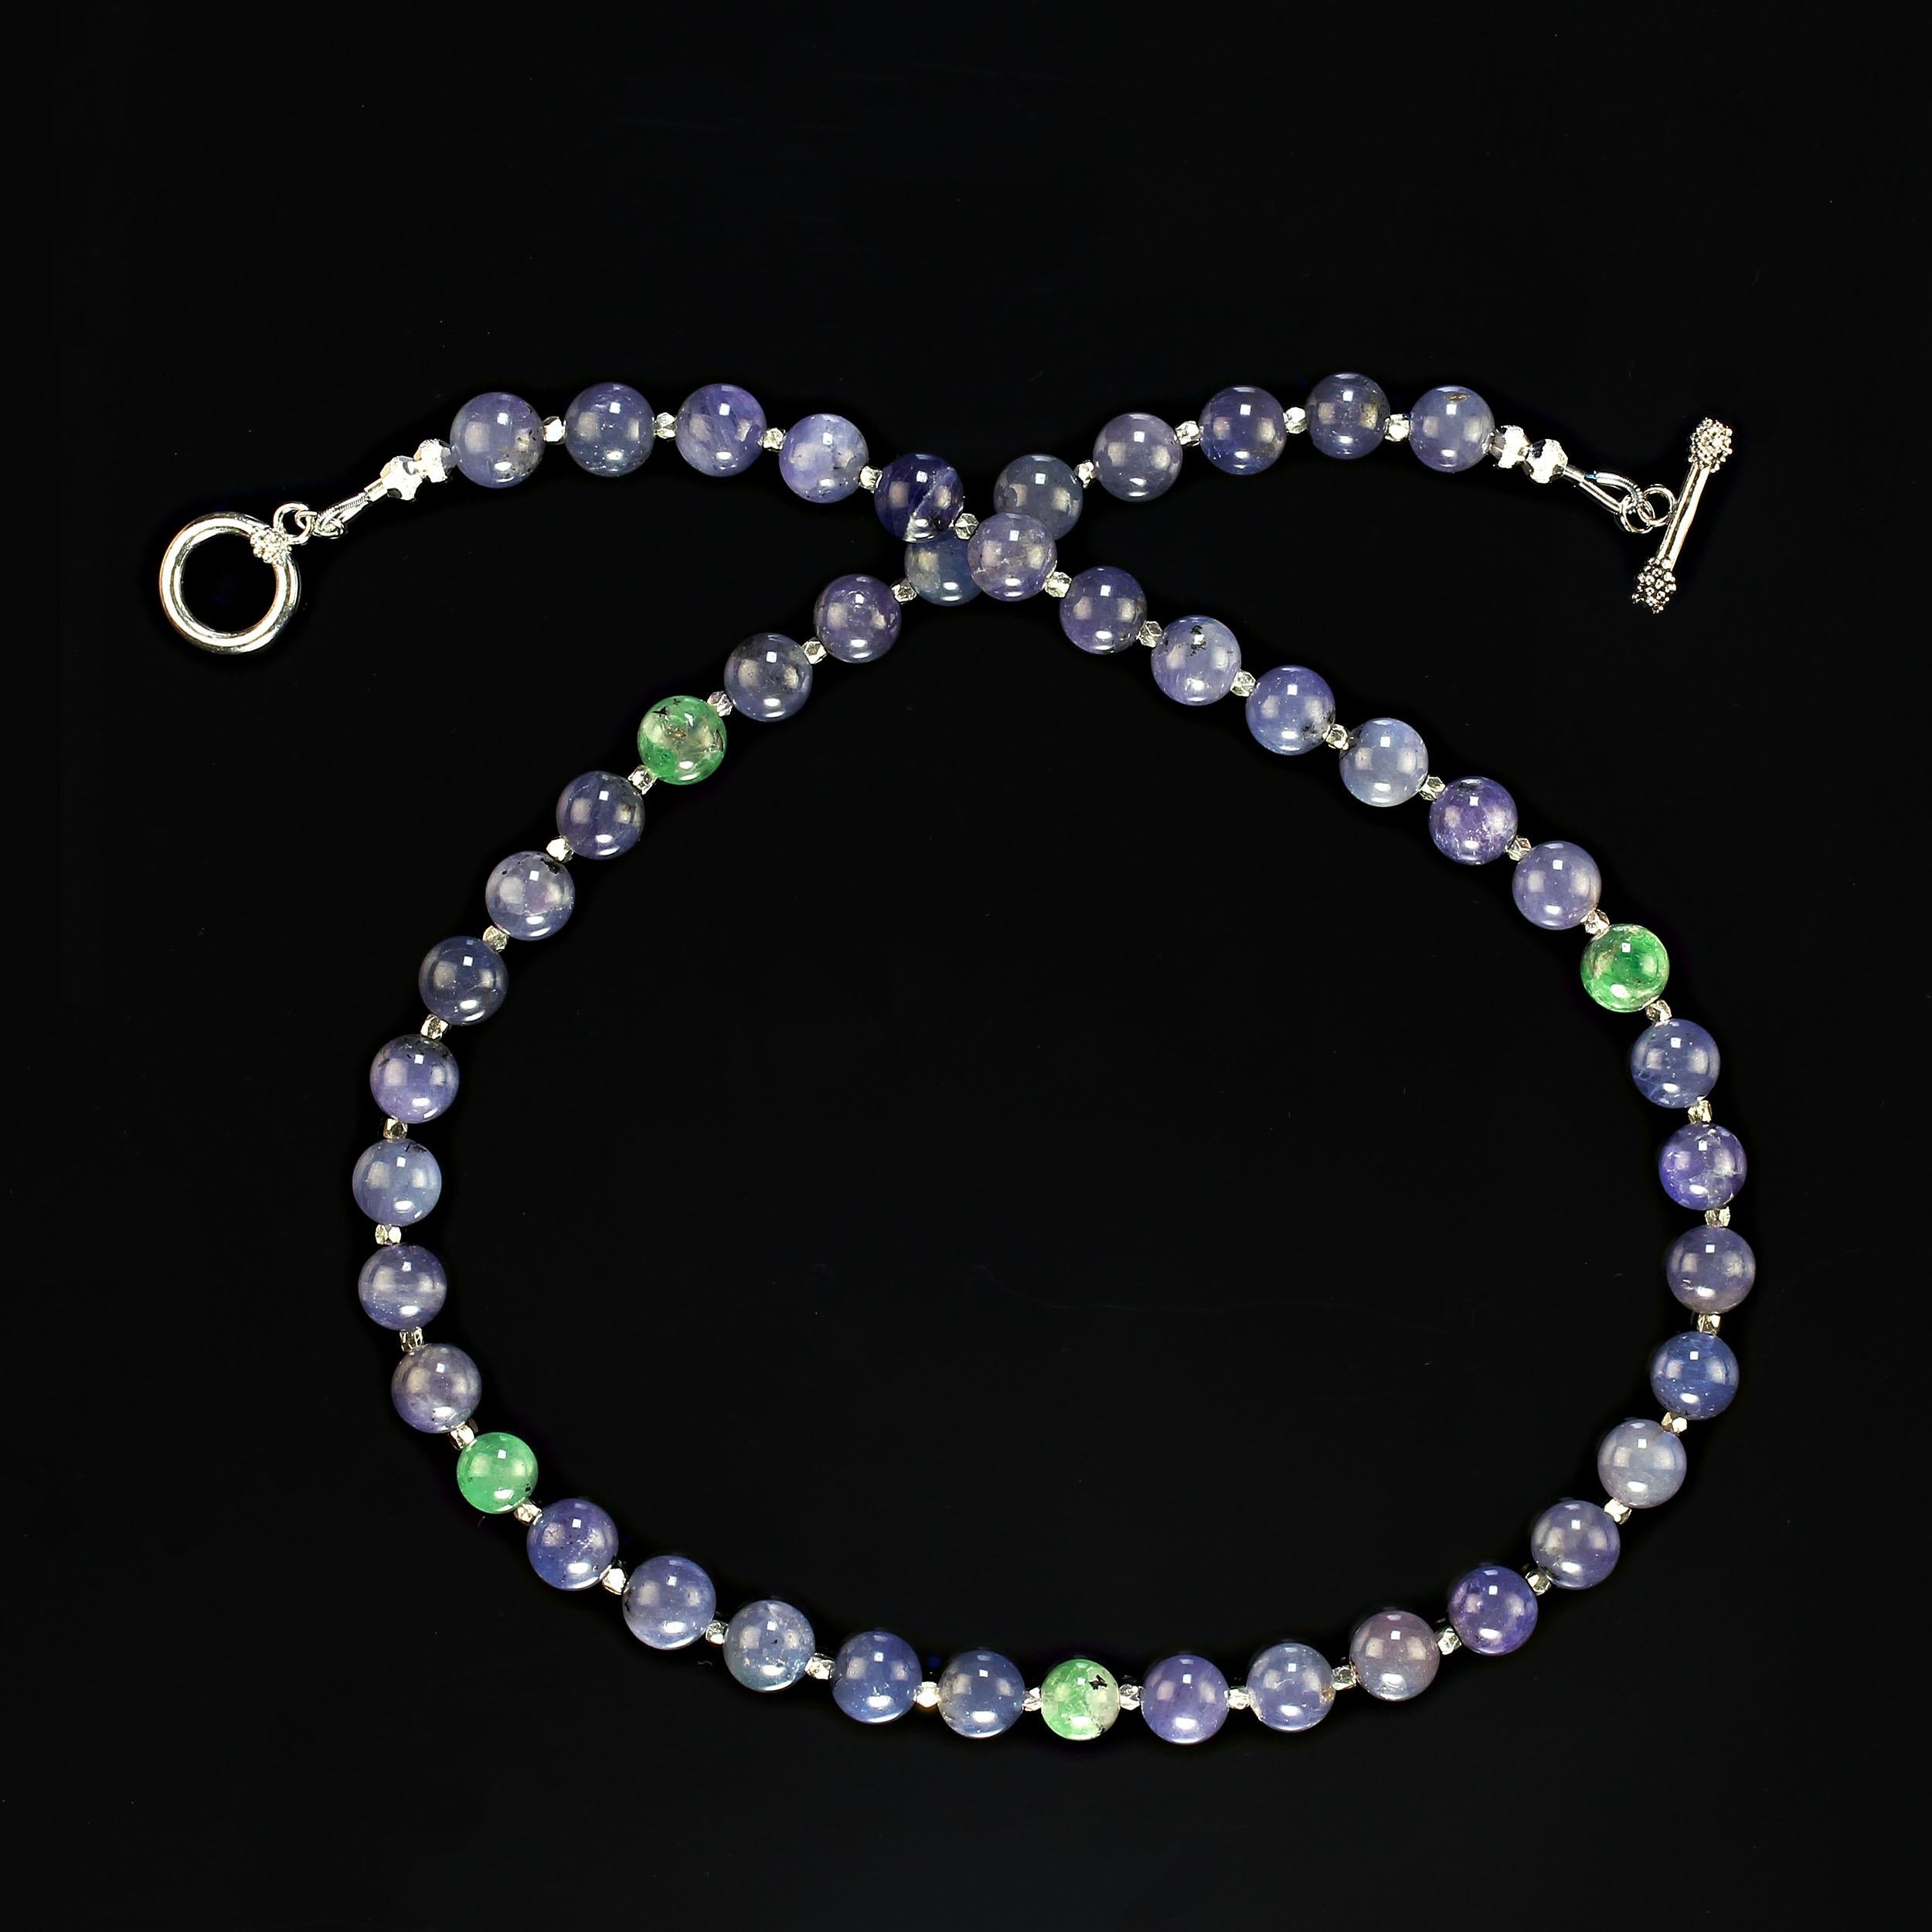 20 Inch unique translucent tanzanite shades of purple/ blue and green.  These unusual colors are combined with faceted fine silver accents to create a one-of-a-kind necklace the will intrigue and delight you. The 8mm tanzanite a smooth and highly